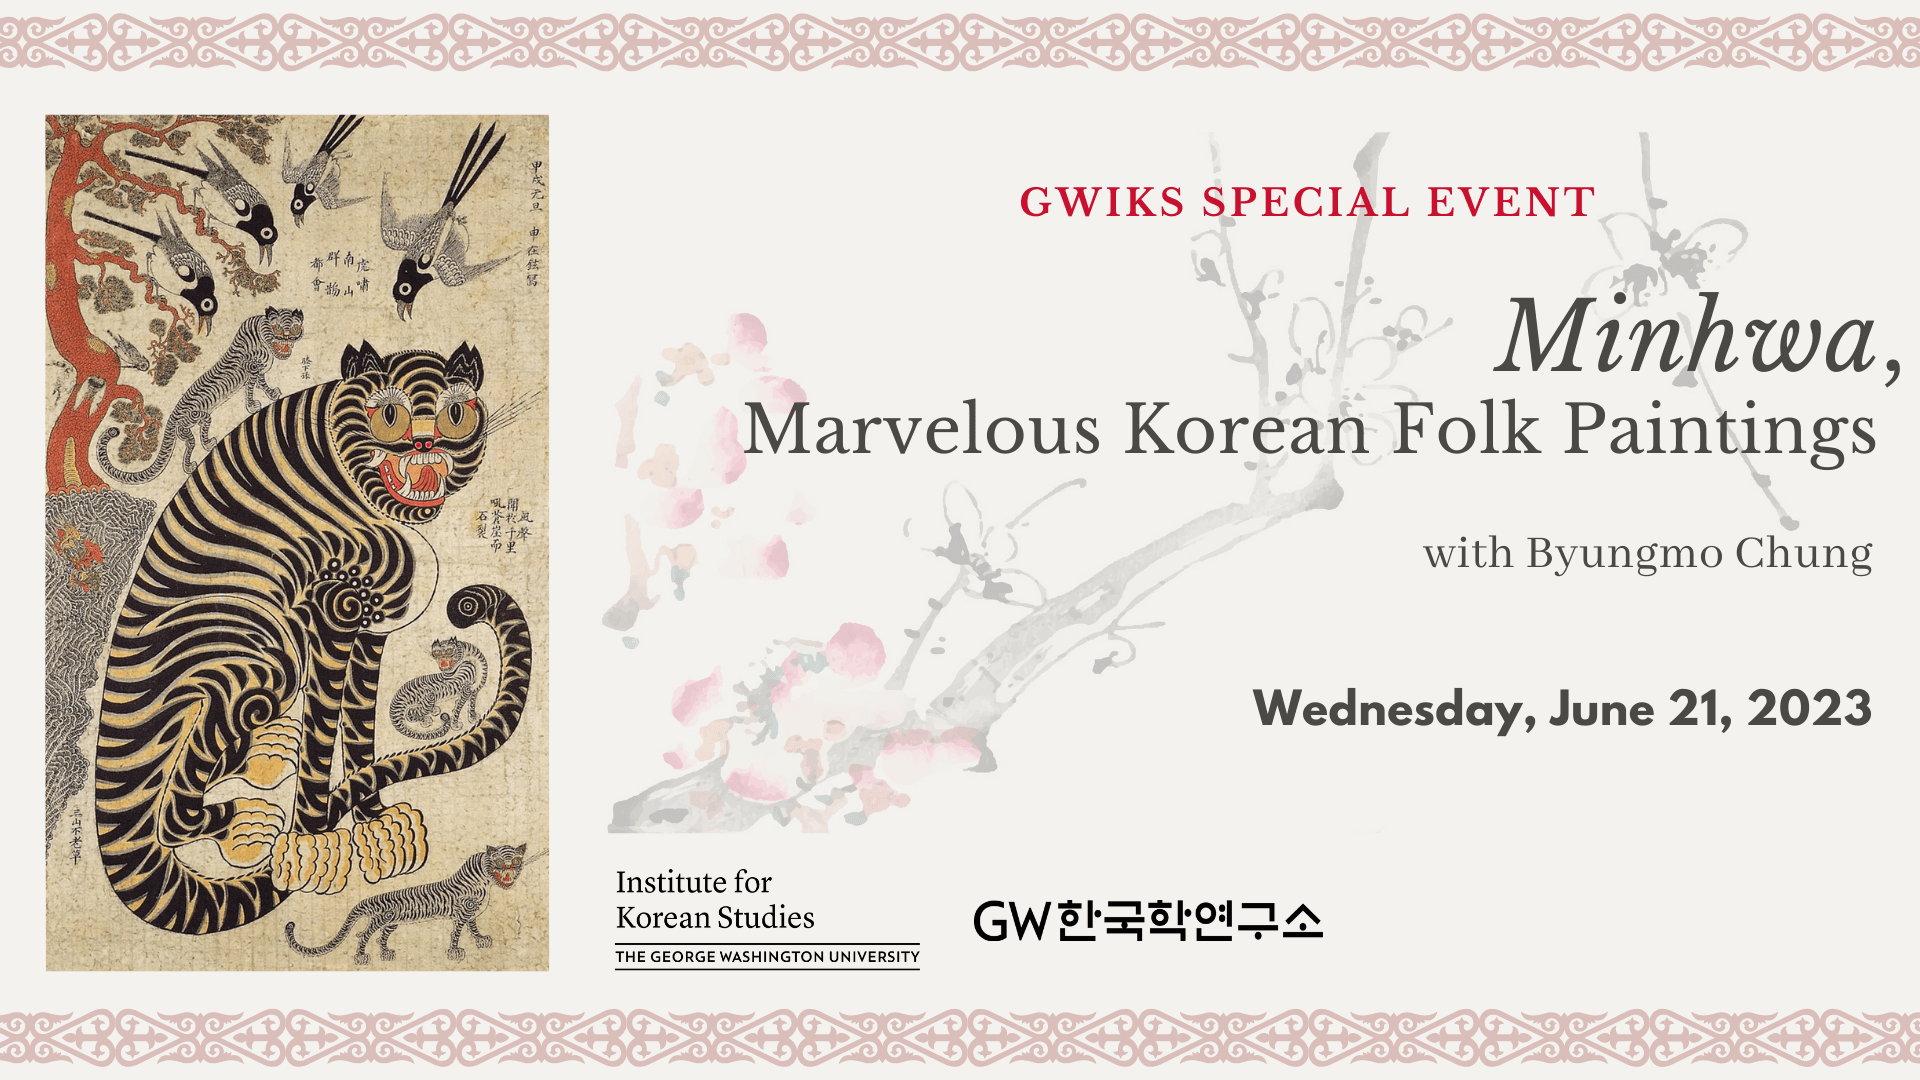 event banner for Premodern Korea Lecture series with Franklin Rausch